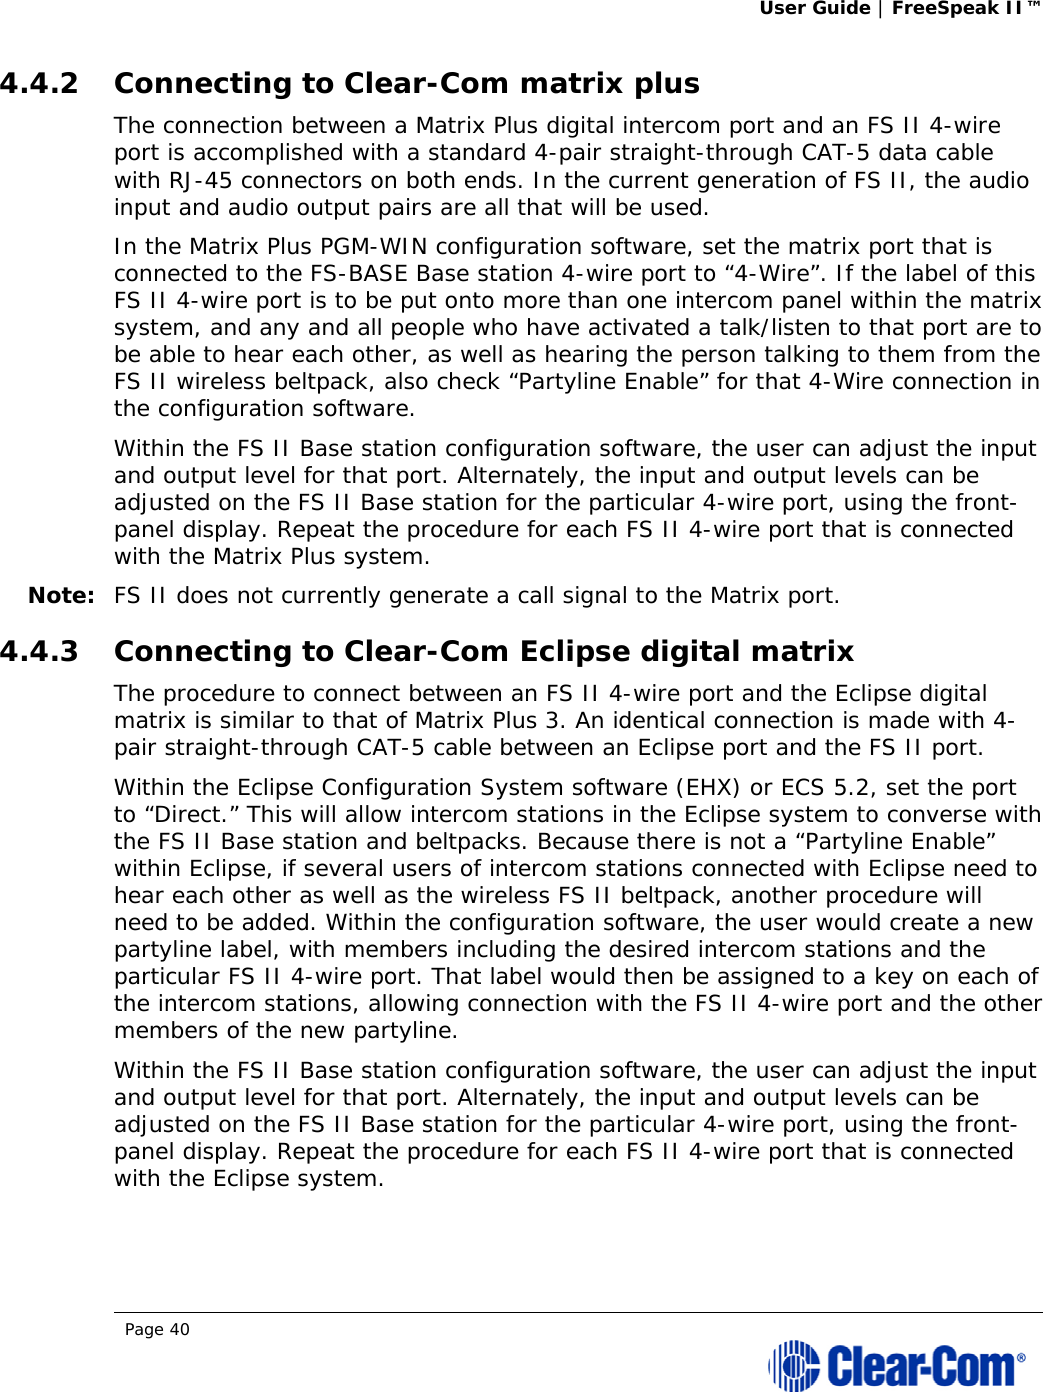 User Guide | FreeSpeak II™  Page 40  4.4.2 Connecting to Clear-Com matrix plus The connection between a Matrix Plus digital intercom port and an FS II 4-wire port is accomplished with a standard 4-pair straight-through CAT-5 data cable with RJ-45 connectors on both ends. In the current generation of FS II, the audio input and audio output pairs are all that will be used.  In the Matrix Plus PGM-WIN configuration software, set the matrix port that is connected to the FS-BASE Base station 4-wire port to “4-Wire”. If the label of this FS II 4-wire port is to be put onto more than one intercom panel within the matrix system, and any and all people who have activated a talk/listen to that port are to be able to hear each other, as well as hearing the person talking to them from the FS II wireless beltpack, also check “Partyline Enable” for that 4-Wire connection in the configuration software. Within the FS II Base station configuration software, the user can adjust the input and output level for that port. Alternately, the input and output levels can be adjusted on the FS II Base station for the particular 4-wire port, using the front-panel display. Repeat the procedure for each FS II 4-wire port that is connected with the Matrix Plus system. Note: FS II does not currently generate a call signal to the Matrix port.  4.4.3 Connecting to Clear-Com Eclipse digital matrix The procedure to connect between an FS II 4-wire port and the Eclipse digital matrix is similar to that of Matrix Plus 3. An identical connection is made with 4-pair straight-through CAT-5 cable between an Eclipse port and the FS II port. Within the Eclipse Configuration System software (EHX) or ECS 5.2, set the port to “Direct.” This will allow intercom stations in the Eclipse system to converse with the FS II Base station and beltpacks. Because there is not a “Partyline Enable” within Eclipse, if several users of intercom stations connected with Eclipse need to hear each other as well as the wireless FS II beltpack, another procedure will need to be added. Within the configuration software, the user would create a new partyline label, with members including the desired intercom stations and the particular FS II 4-wire port. That label would then be assigned to a key on each of the intercom stations, allowing connection with the FS II 4-wire port and the other members of the new partyline. Within the FS II Base station configuration software, the user can adjust the input and output level for that port. Alternately, the input and output levels can be adjusted on the FS II Base station for the particular 4-wire port, using the front-panel display. Repeat the procedure for each FS II 4-wire port that is connected with the Eclipse system. 